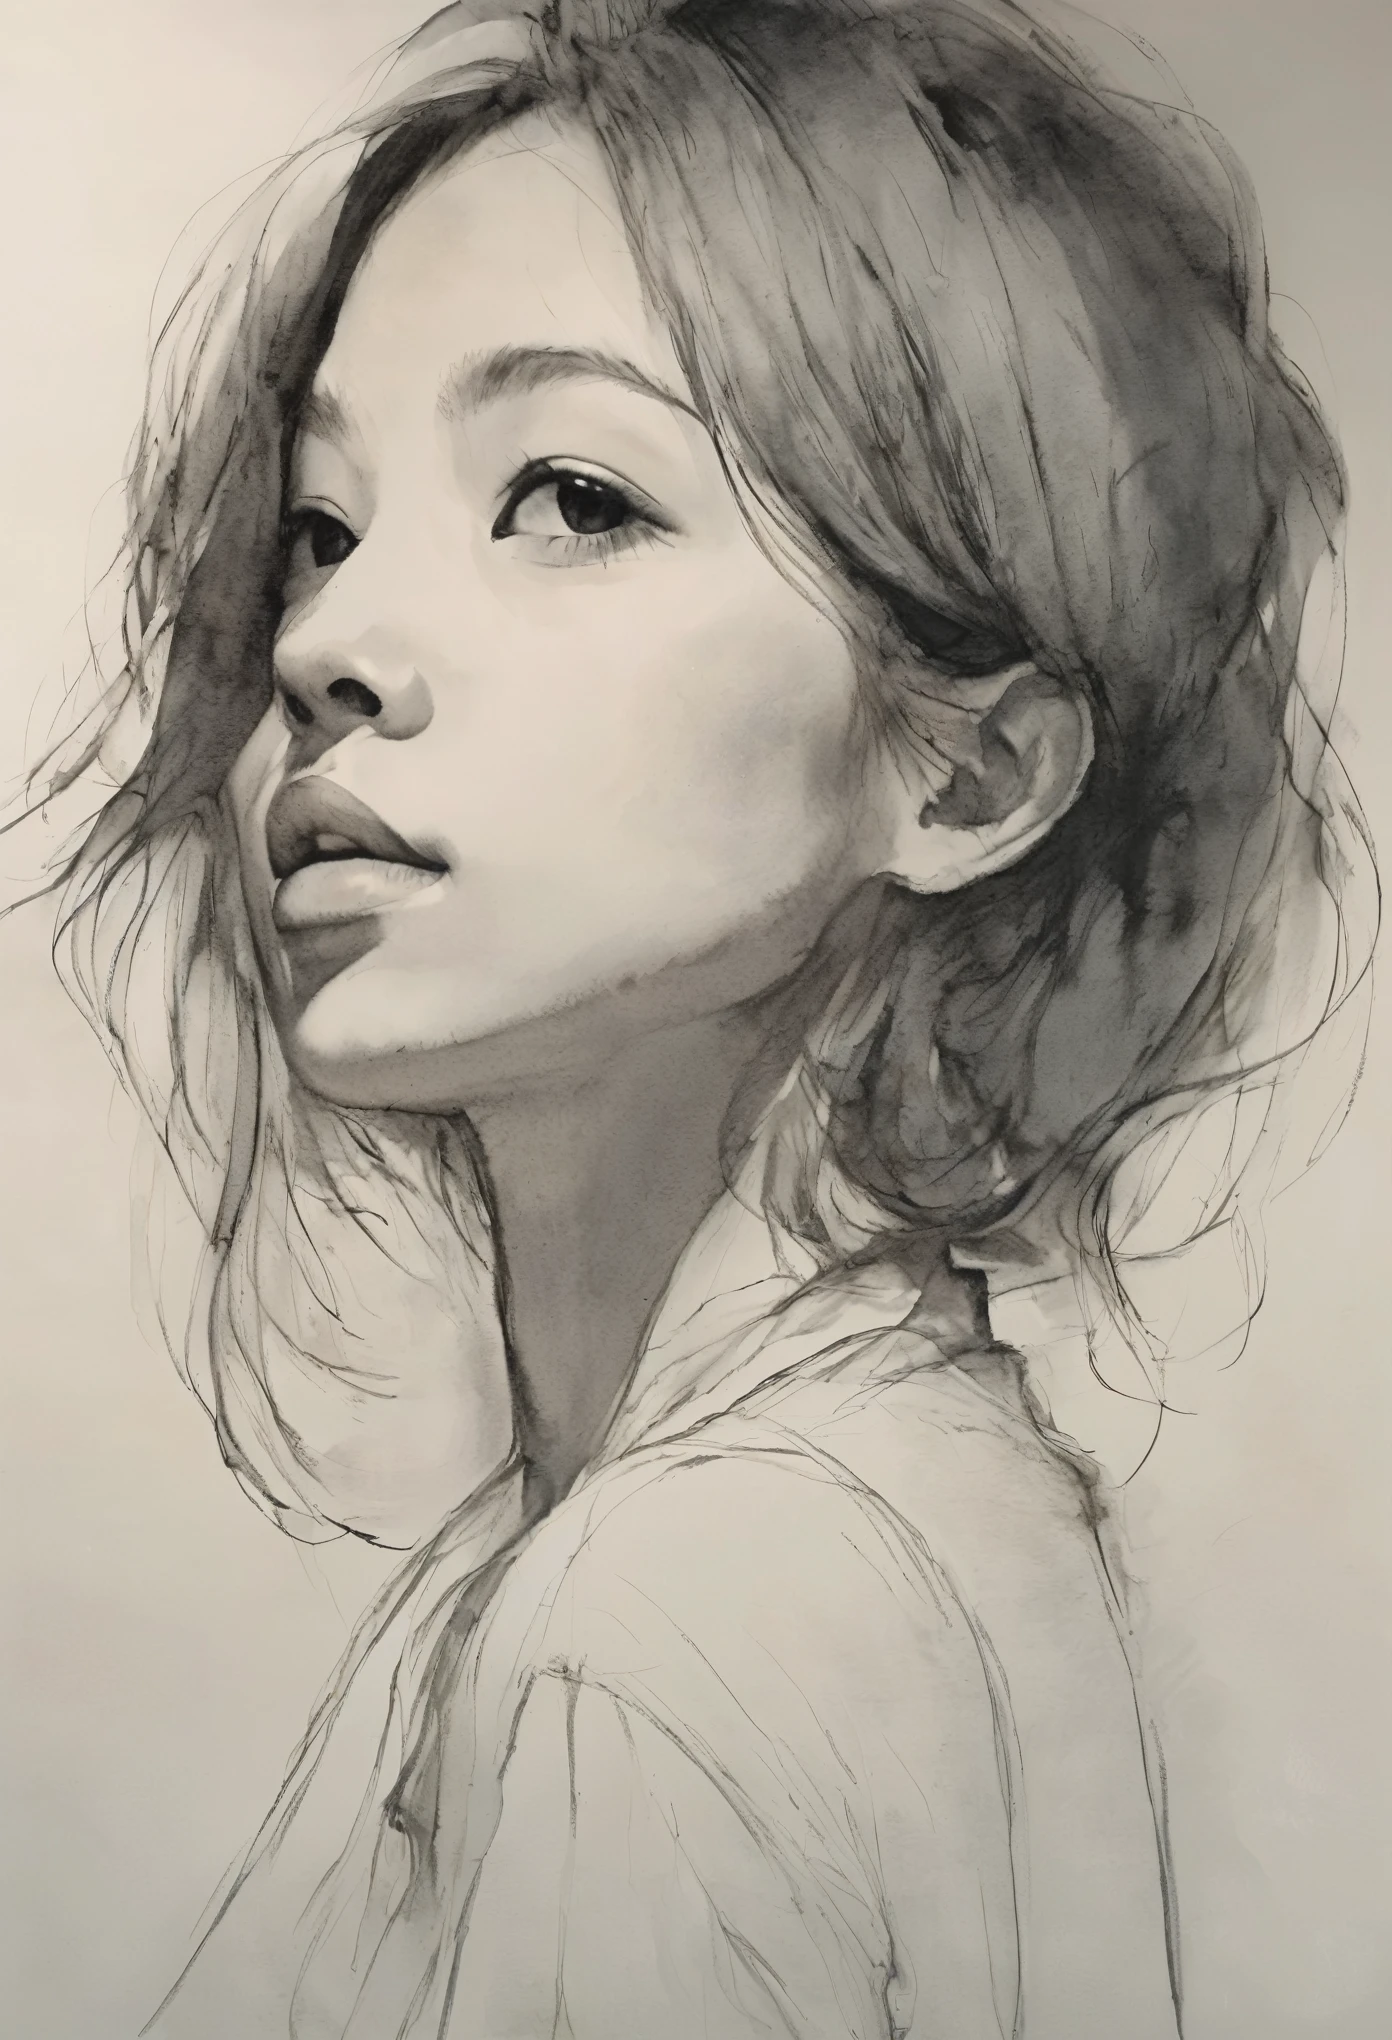 (highest quality, High resolution, masterpiece:1.2), Super detailed, actual:1.37, Black ink sketch, smooth lines, Expressive facial expressions and gestures, simple background, Emphasis on light and shadow and spatial perception, Plenty of negative space, young girl.Ink Portrait,smooth lines,Expressive facial features,Subtle emotions,Ink strength comparison,simple background,Emphasis on light and shadow,wide々It was,Plenty of negative space,peaceful atmosphere,peaceful atmosphere,feels like a dream,Delicate yet fascinating details,pastel colour,Calm and introspective,An elegant gesture,Gentle movements,Calm and innocent,Elegant Whisper,quiet and elegant,shining,sublime beauty,Vector illustration,black and white,Natural and Organic,Nourish、Calming the mind,Sublime simplicity,fantastic charm.